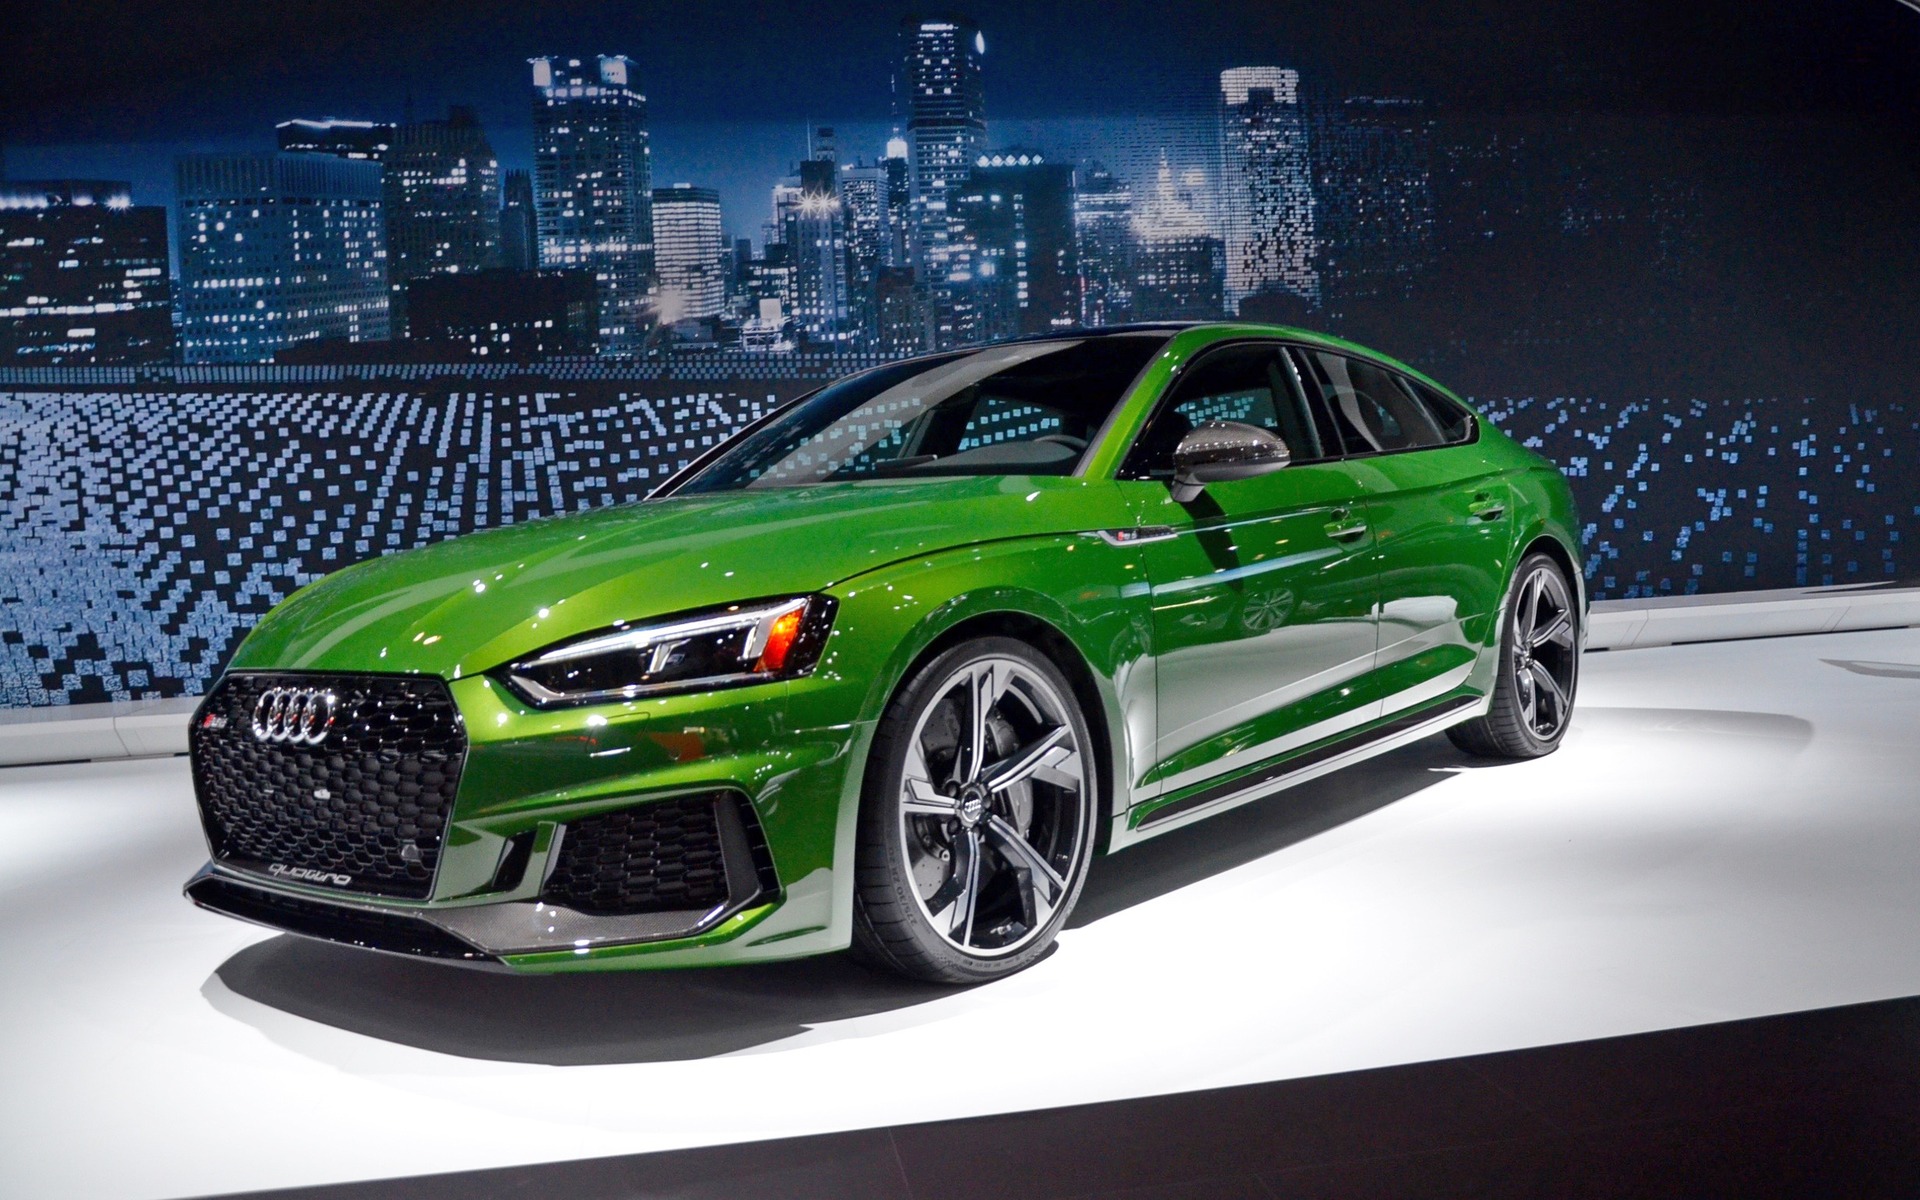 2019 Audi RS 5 Sportback: World Debut at the New York Auto Show